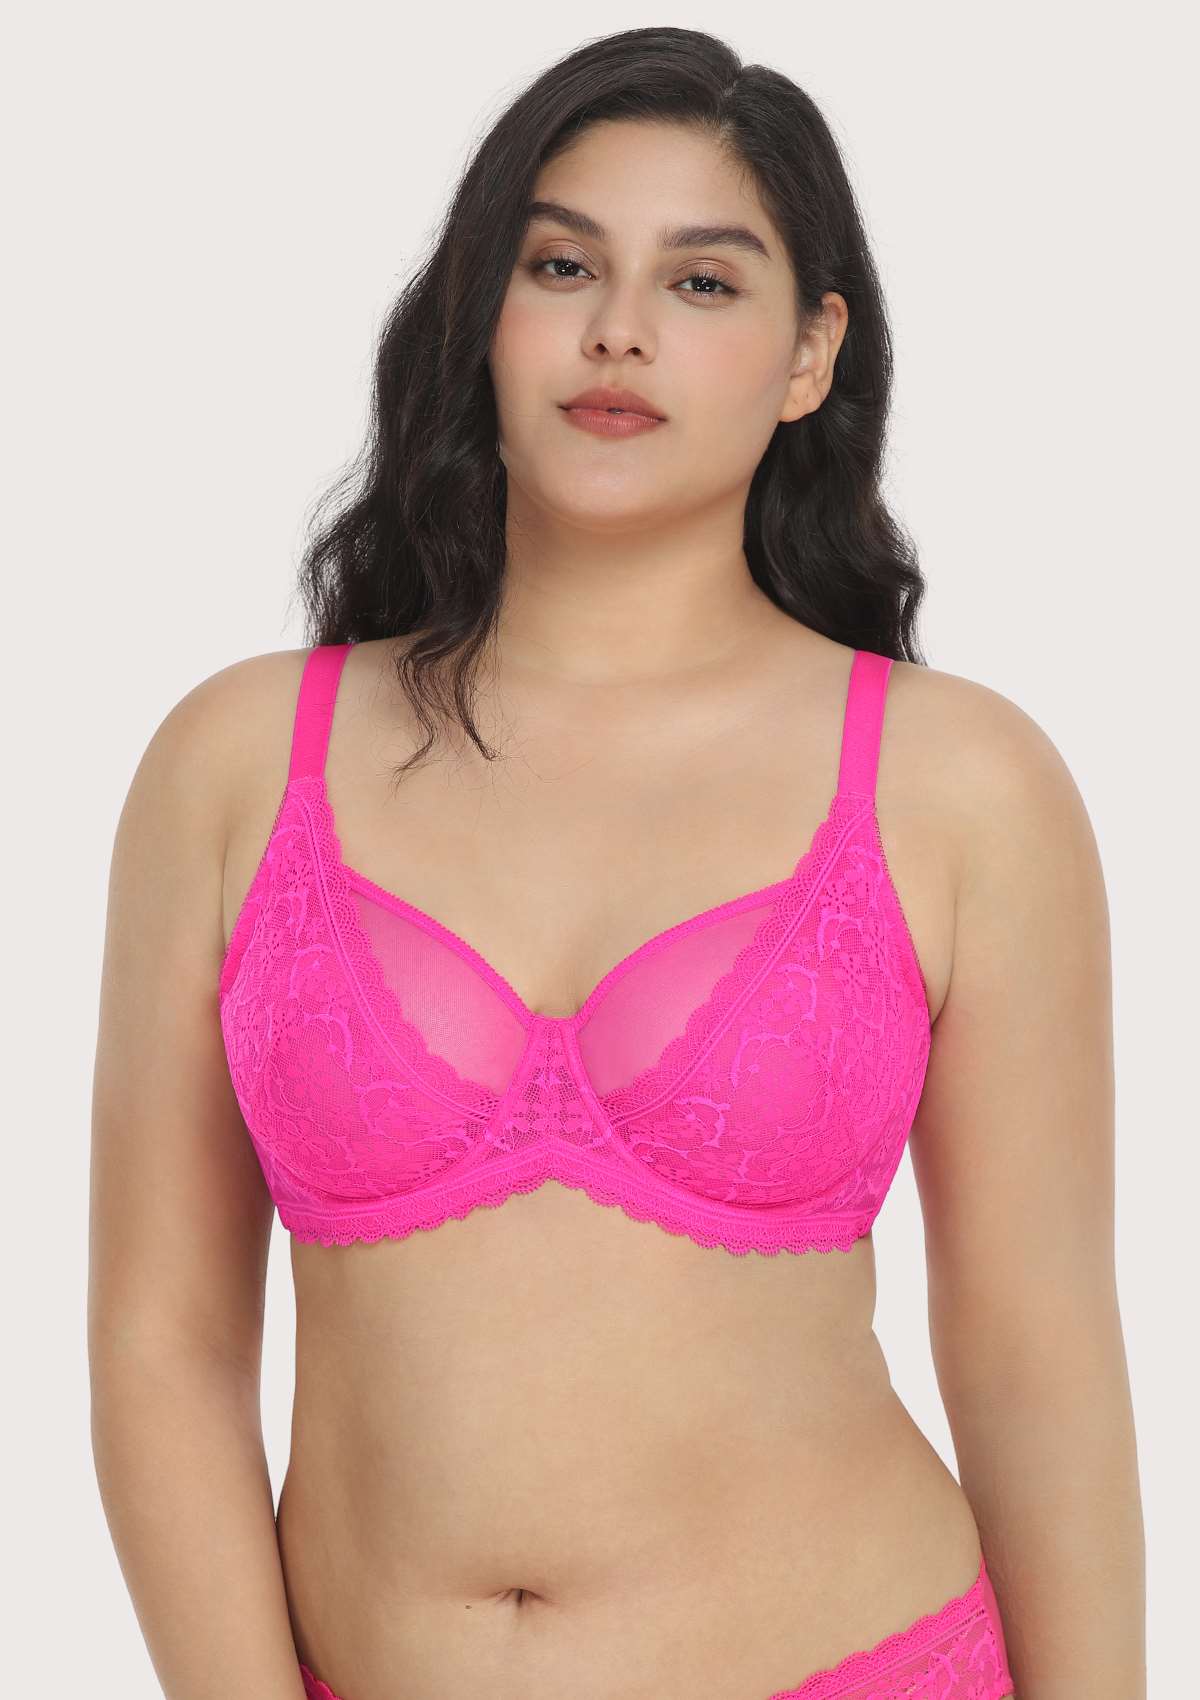 HSIA Anemone Lace Unlined Bra: Supportive, Lightweight Bra - Hot Pink / 38 / C